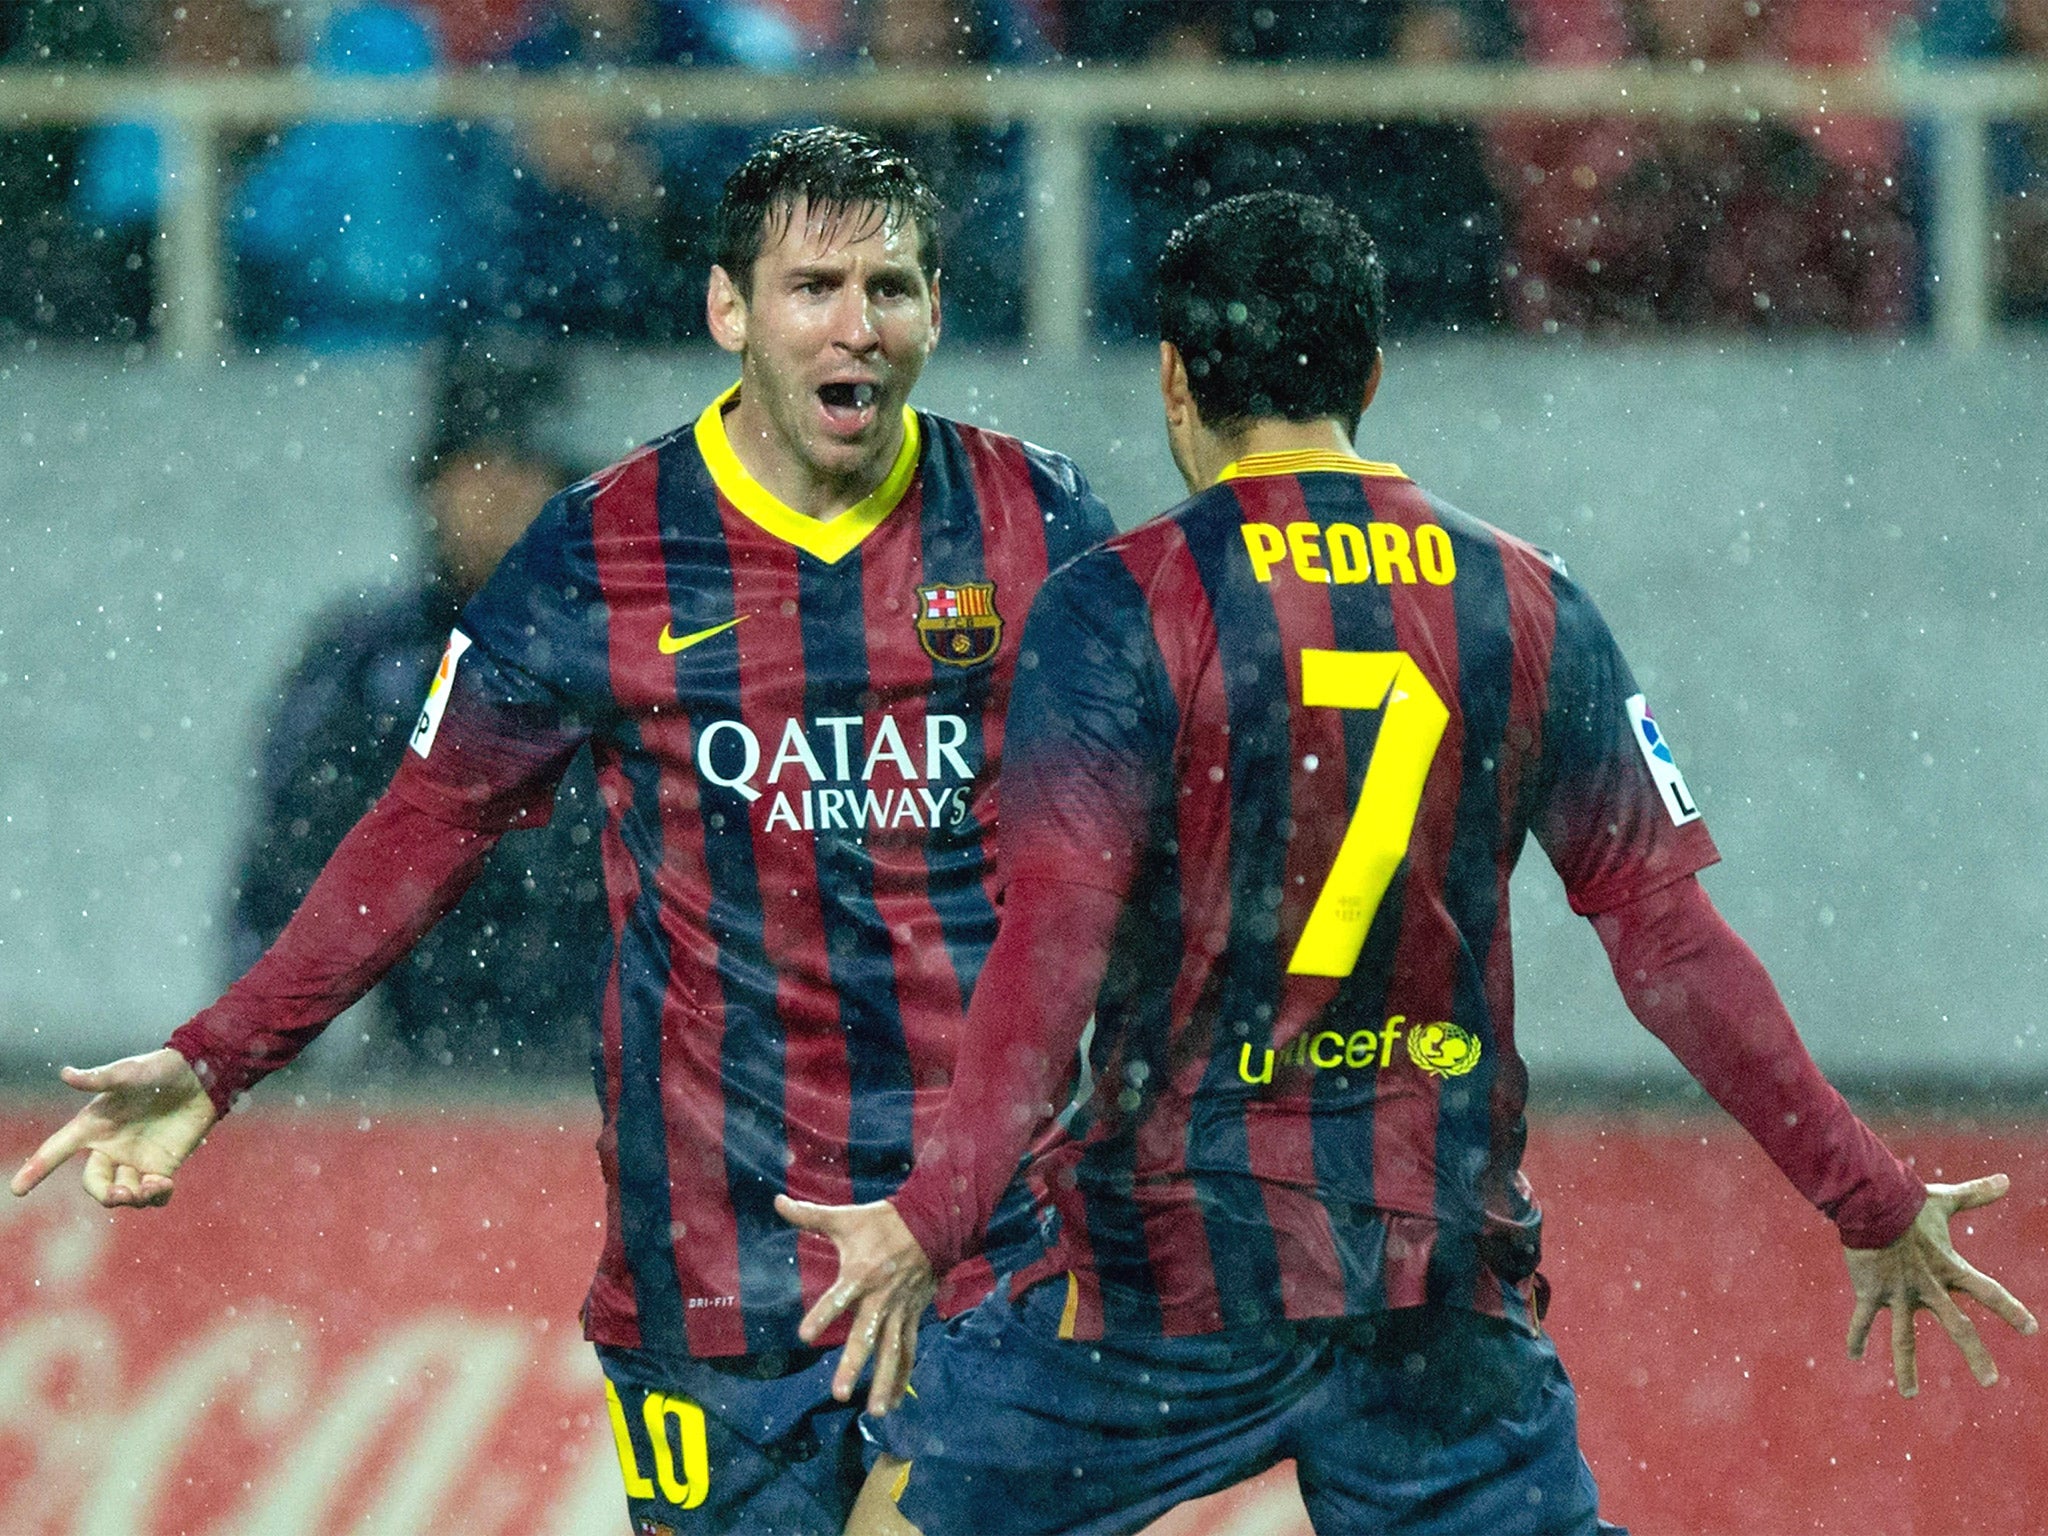 Lionel Messi returned to goalscoring form with two strikes in Barcelona’s 4-1 win on Sunday